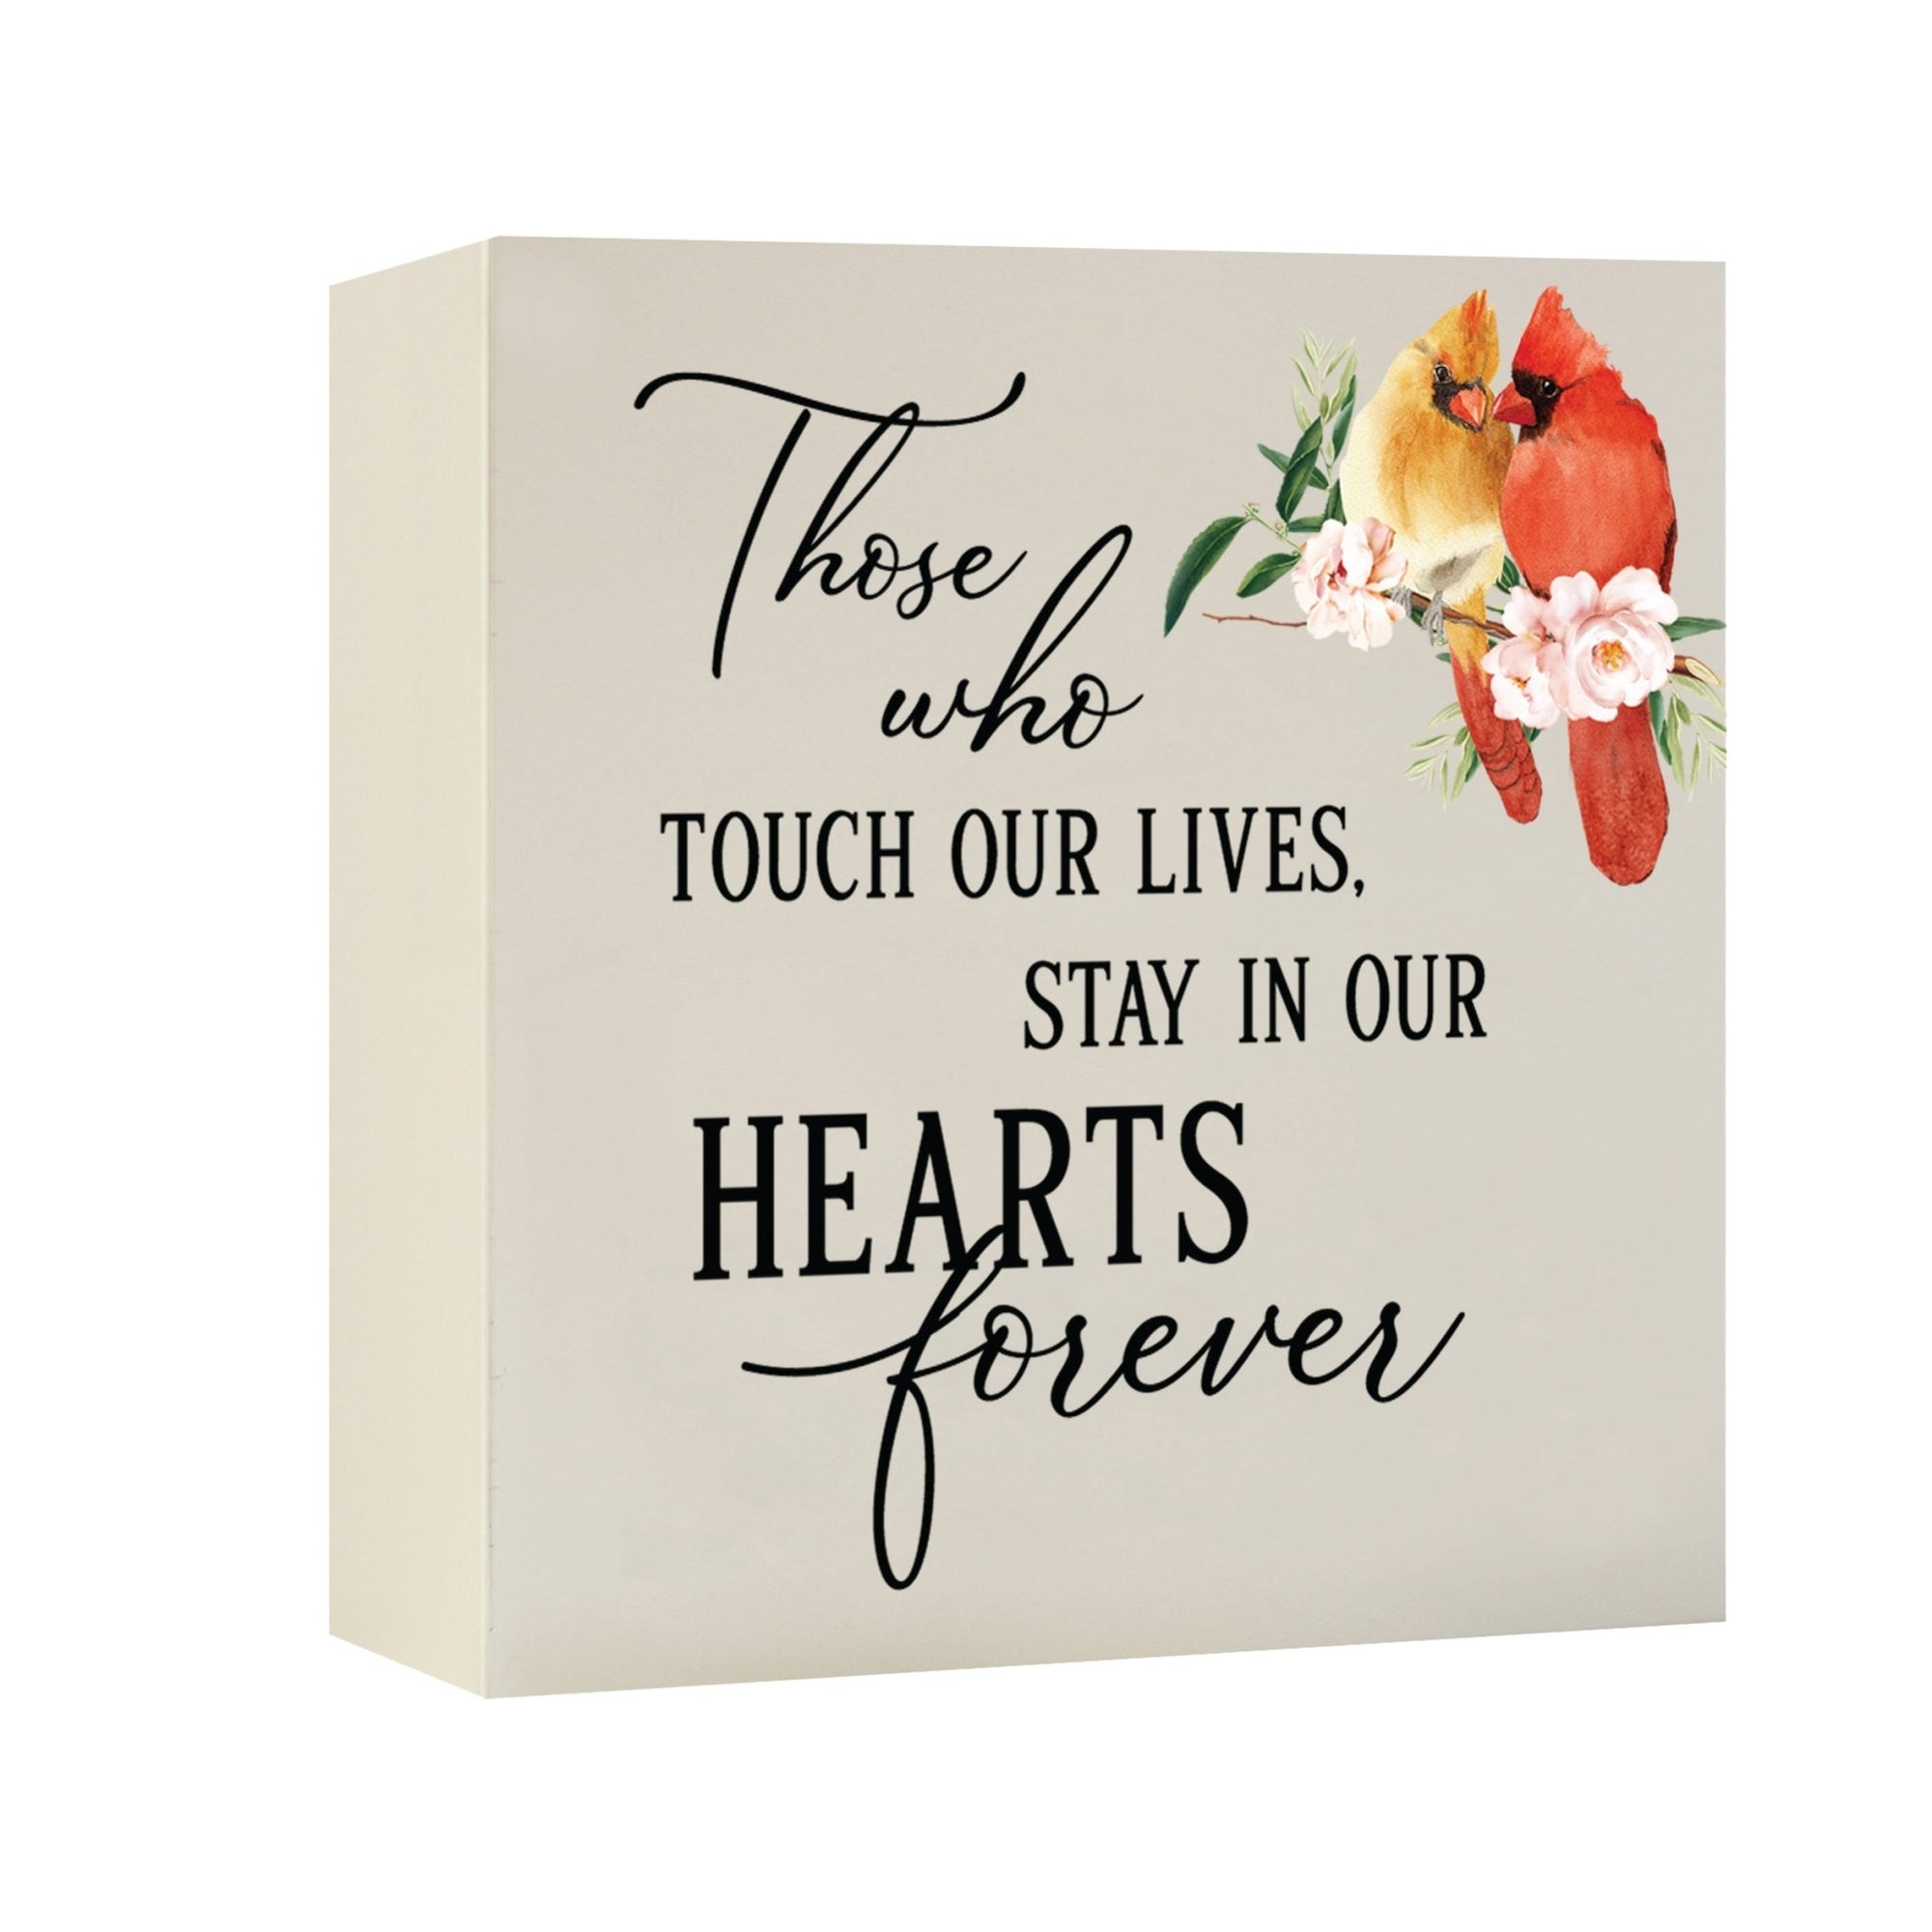 A wooden cremation urn box with a decorative design, suitable for holding human ashes.